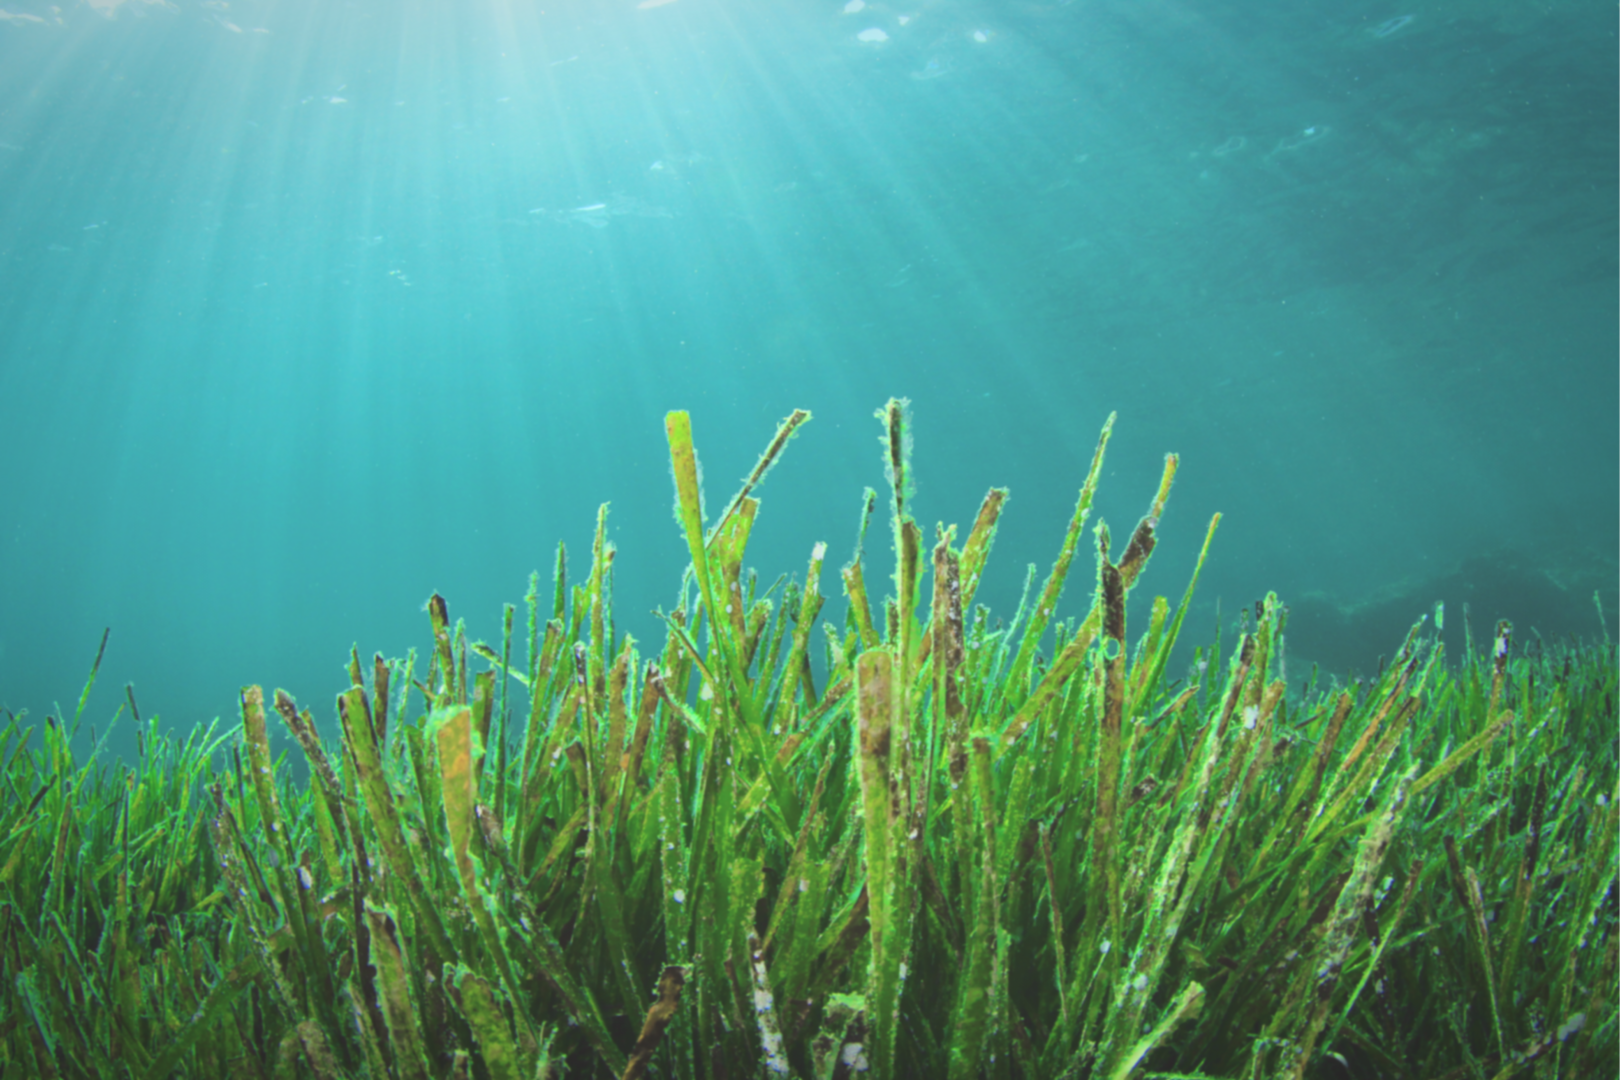 SALIX SEAGRASS SEEDS RECOVERY PROJECT WINS OFWAT’S INNOVATION IN WATER CHALLENGE @SalixBio